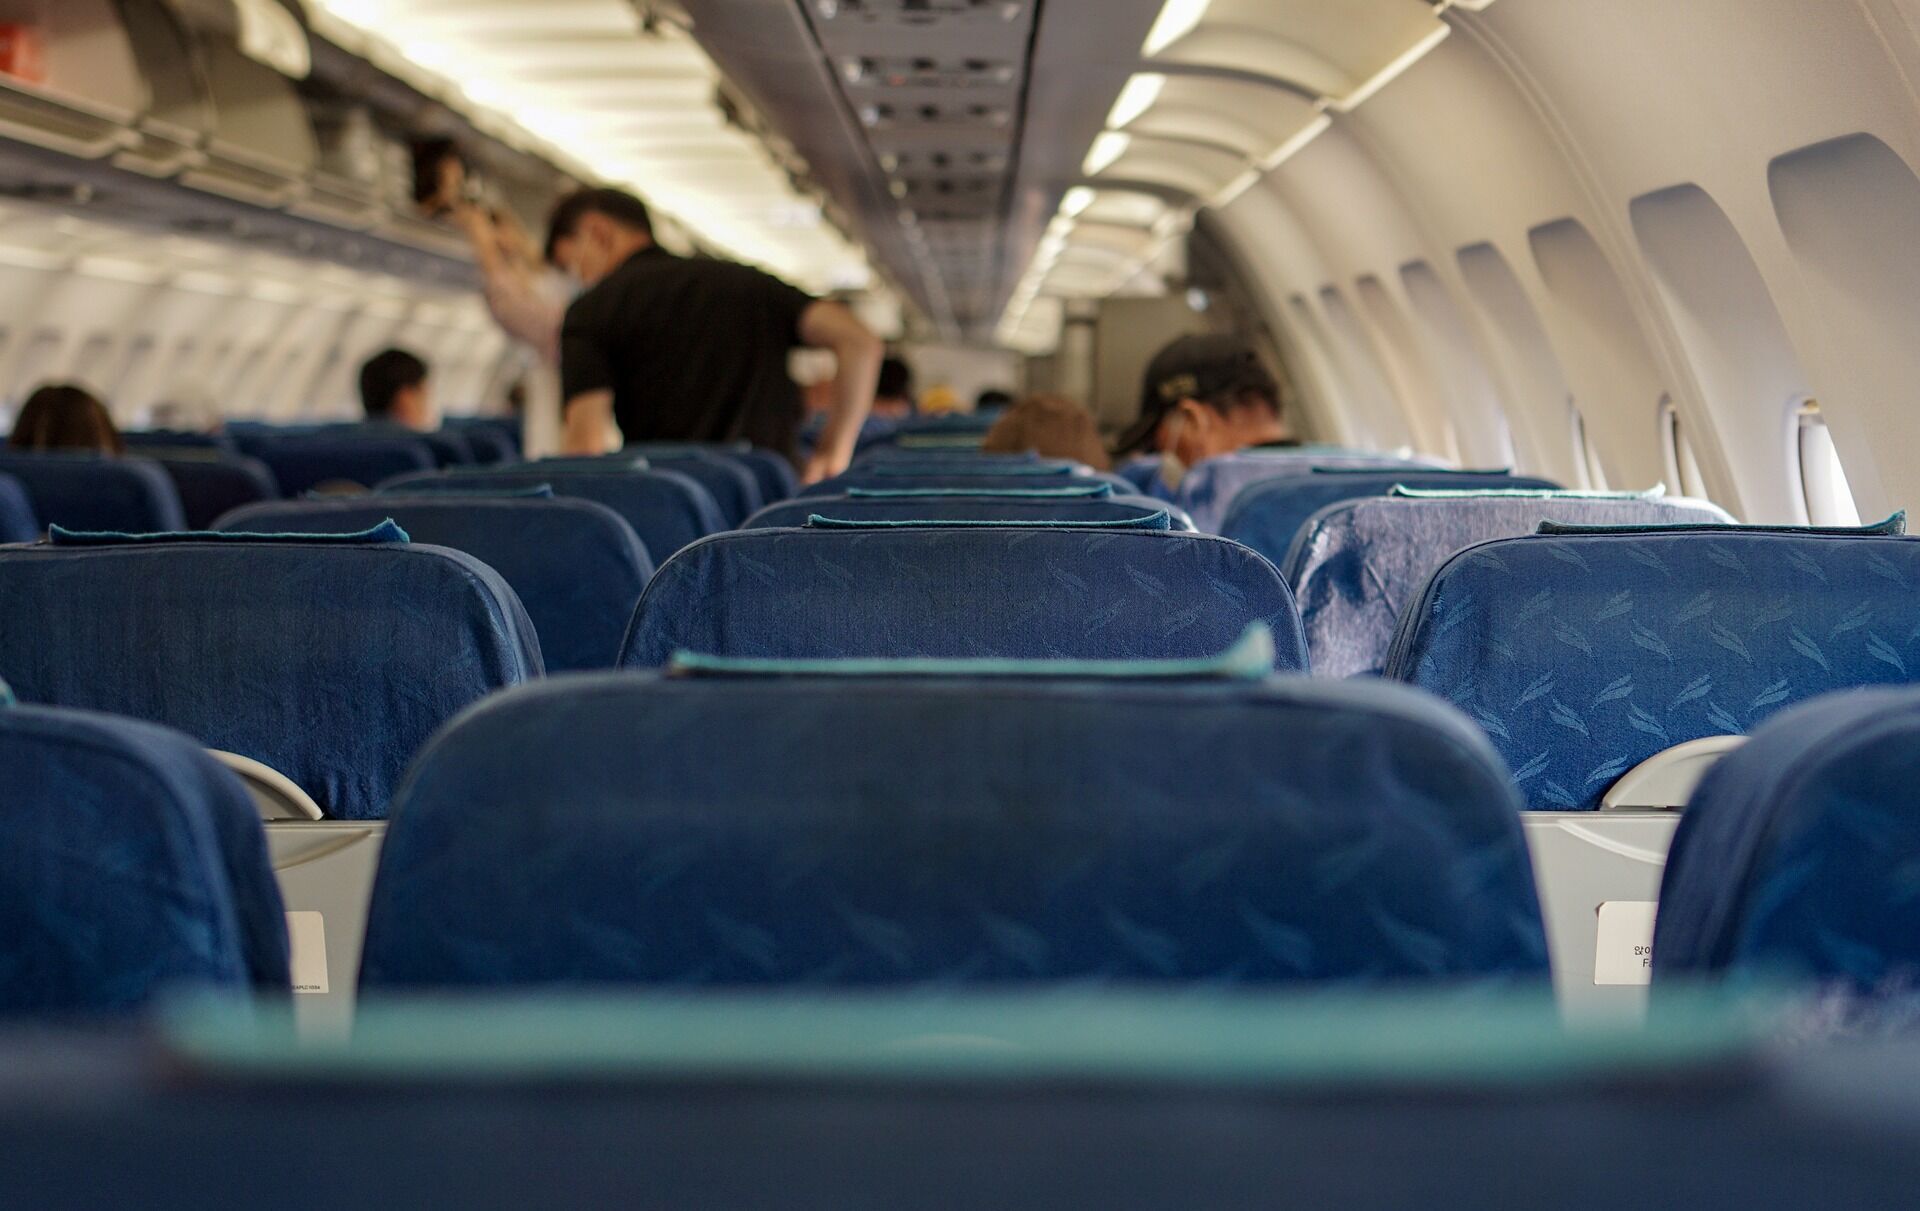 Safety procedures and rules: how to behave in case of an emergency on an airplane